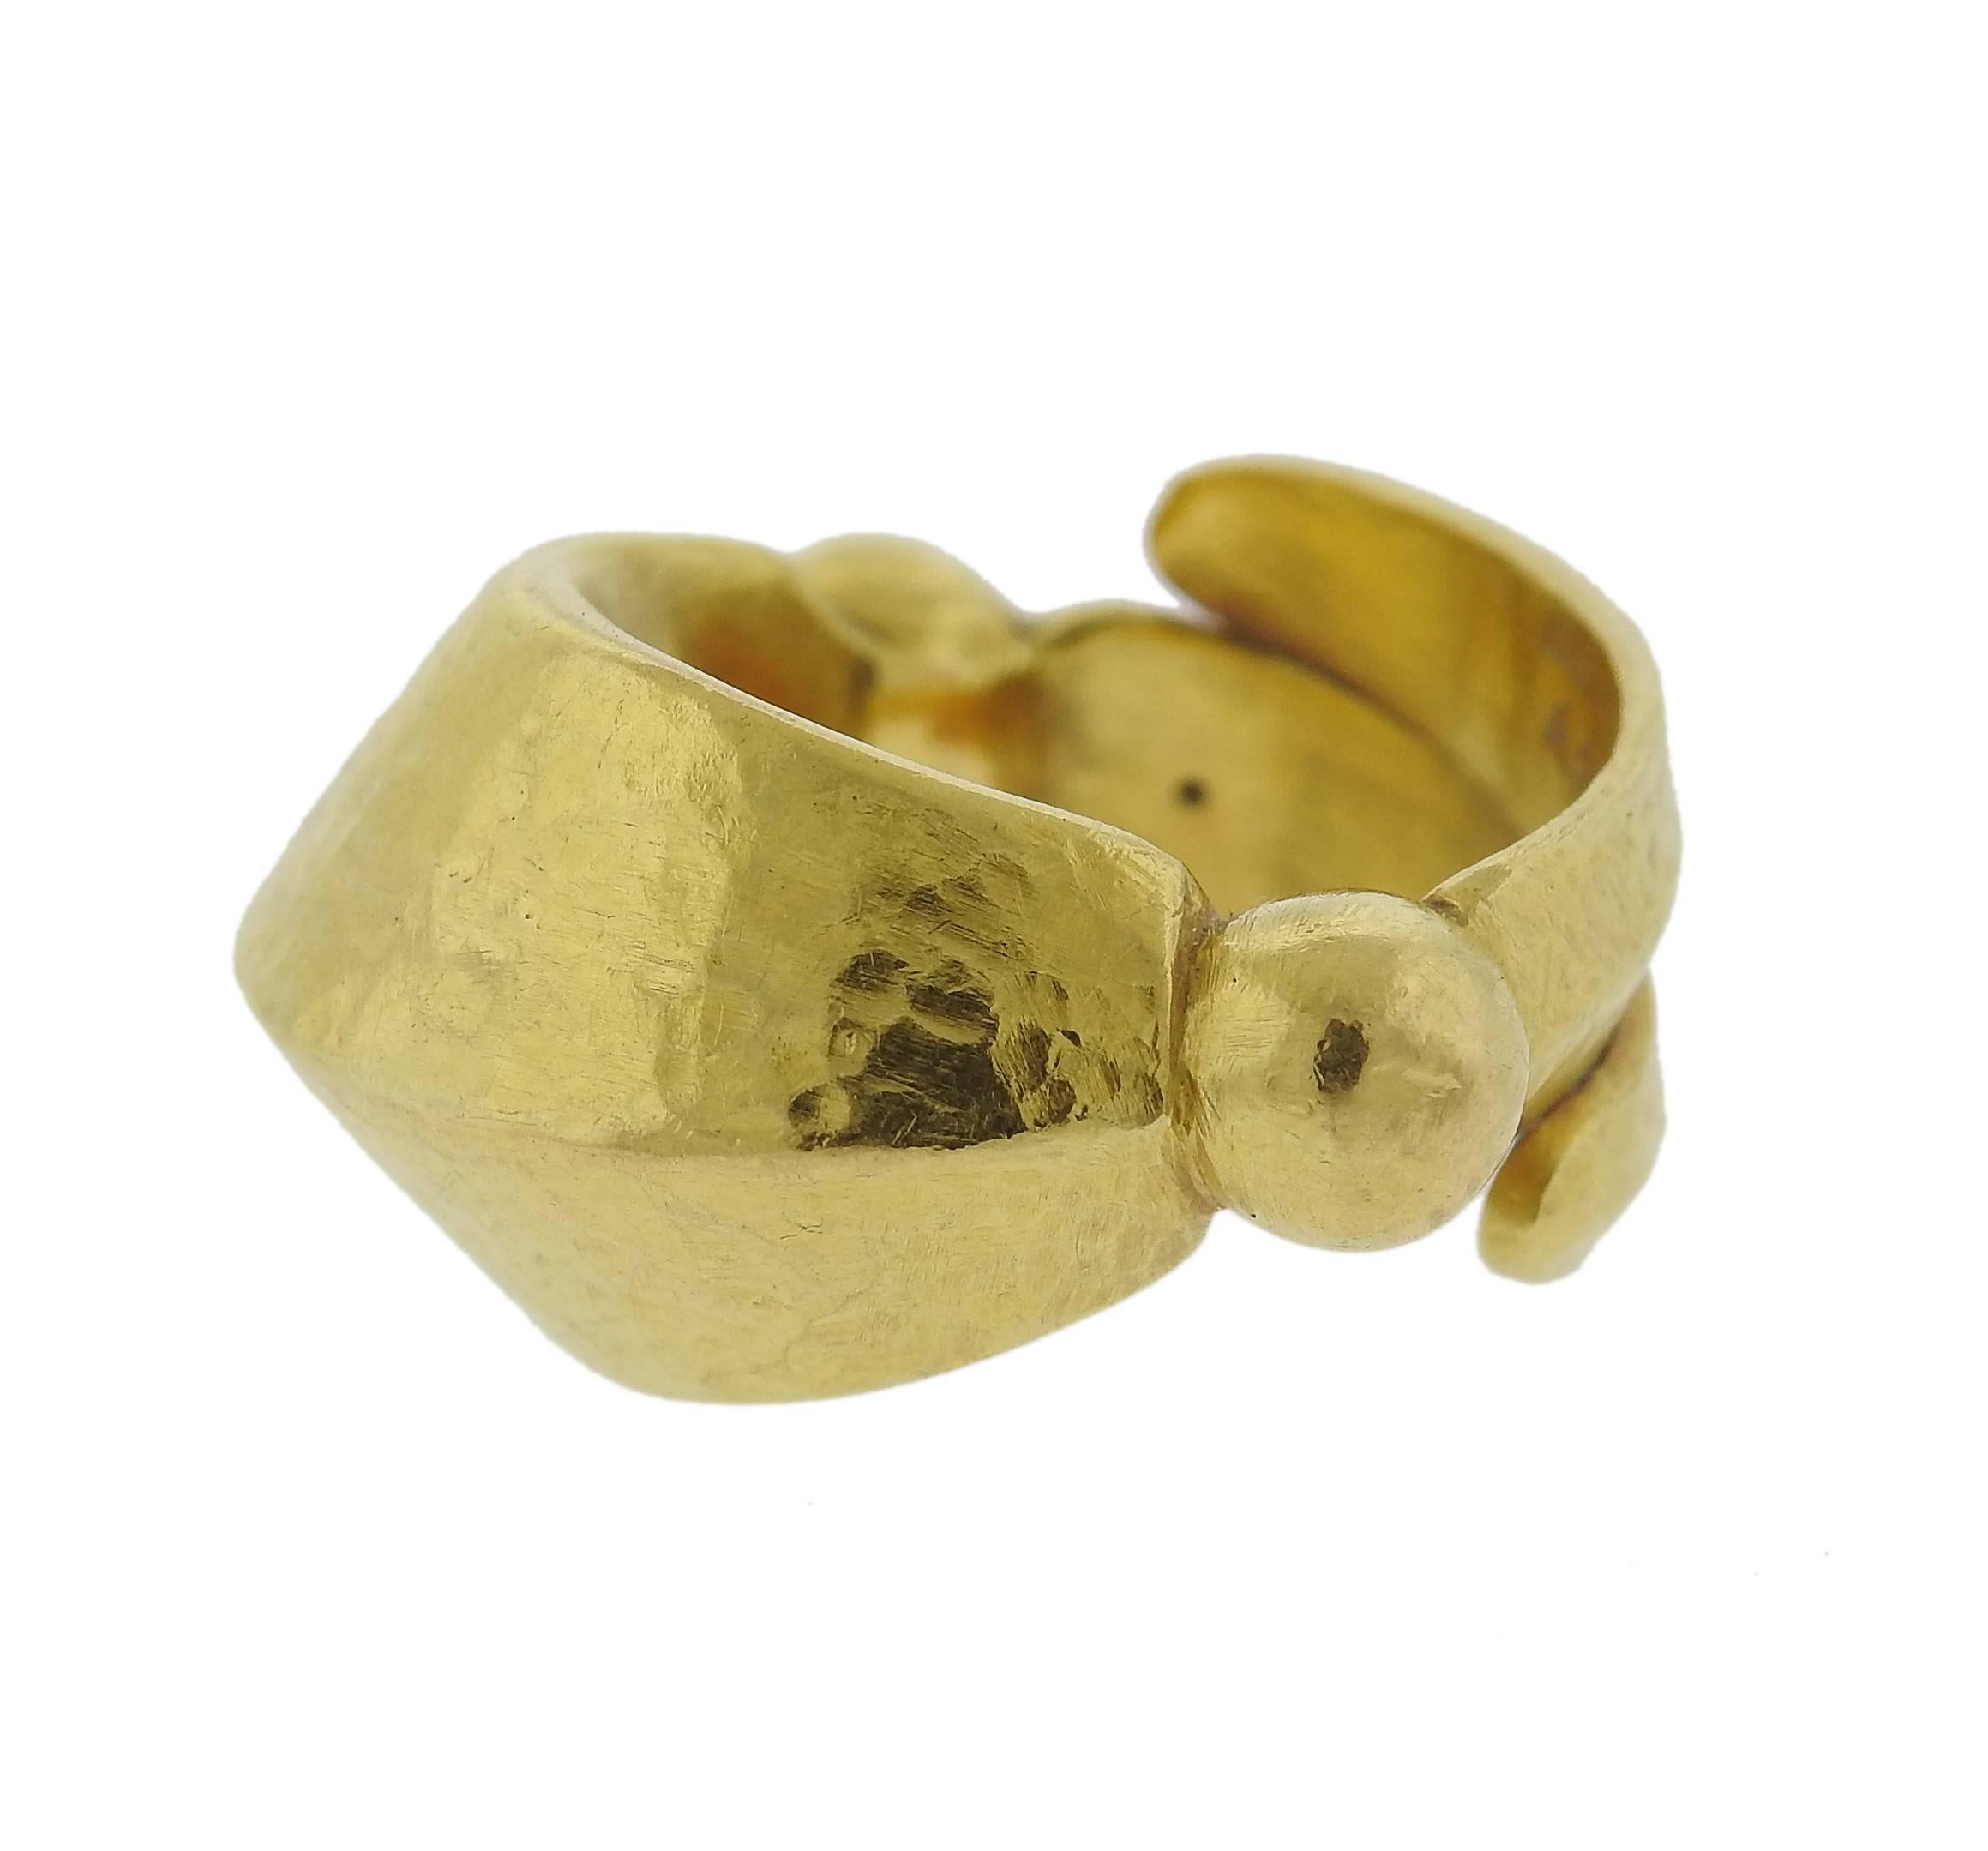 A 22k yellow gold hand hammered ring, crafted by Greek designer Ilias Lalaounis. Ring is a size 3 3/4, ring top is 13mm wide. Marked: A.21, k22, Ilias Lalaounis. Weight of the piece - 8.3 grams